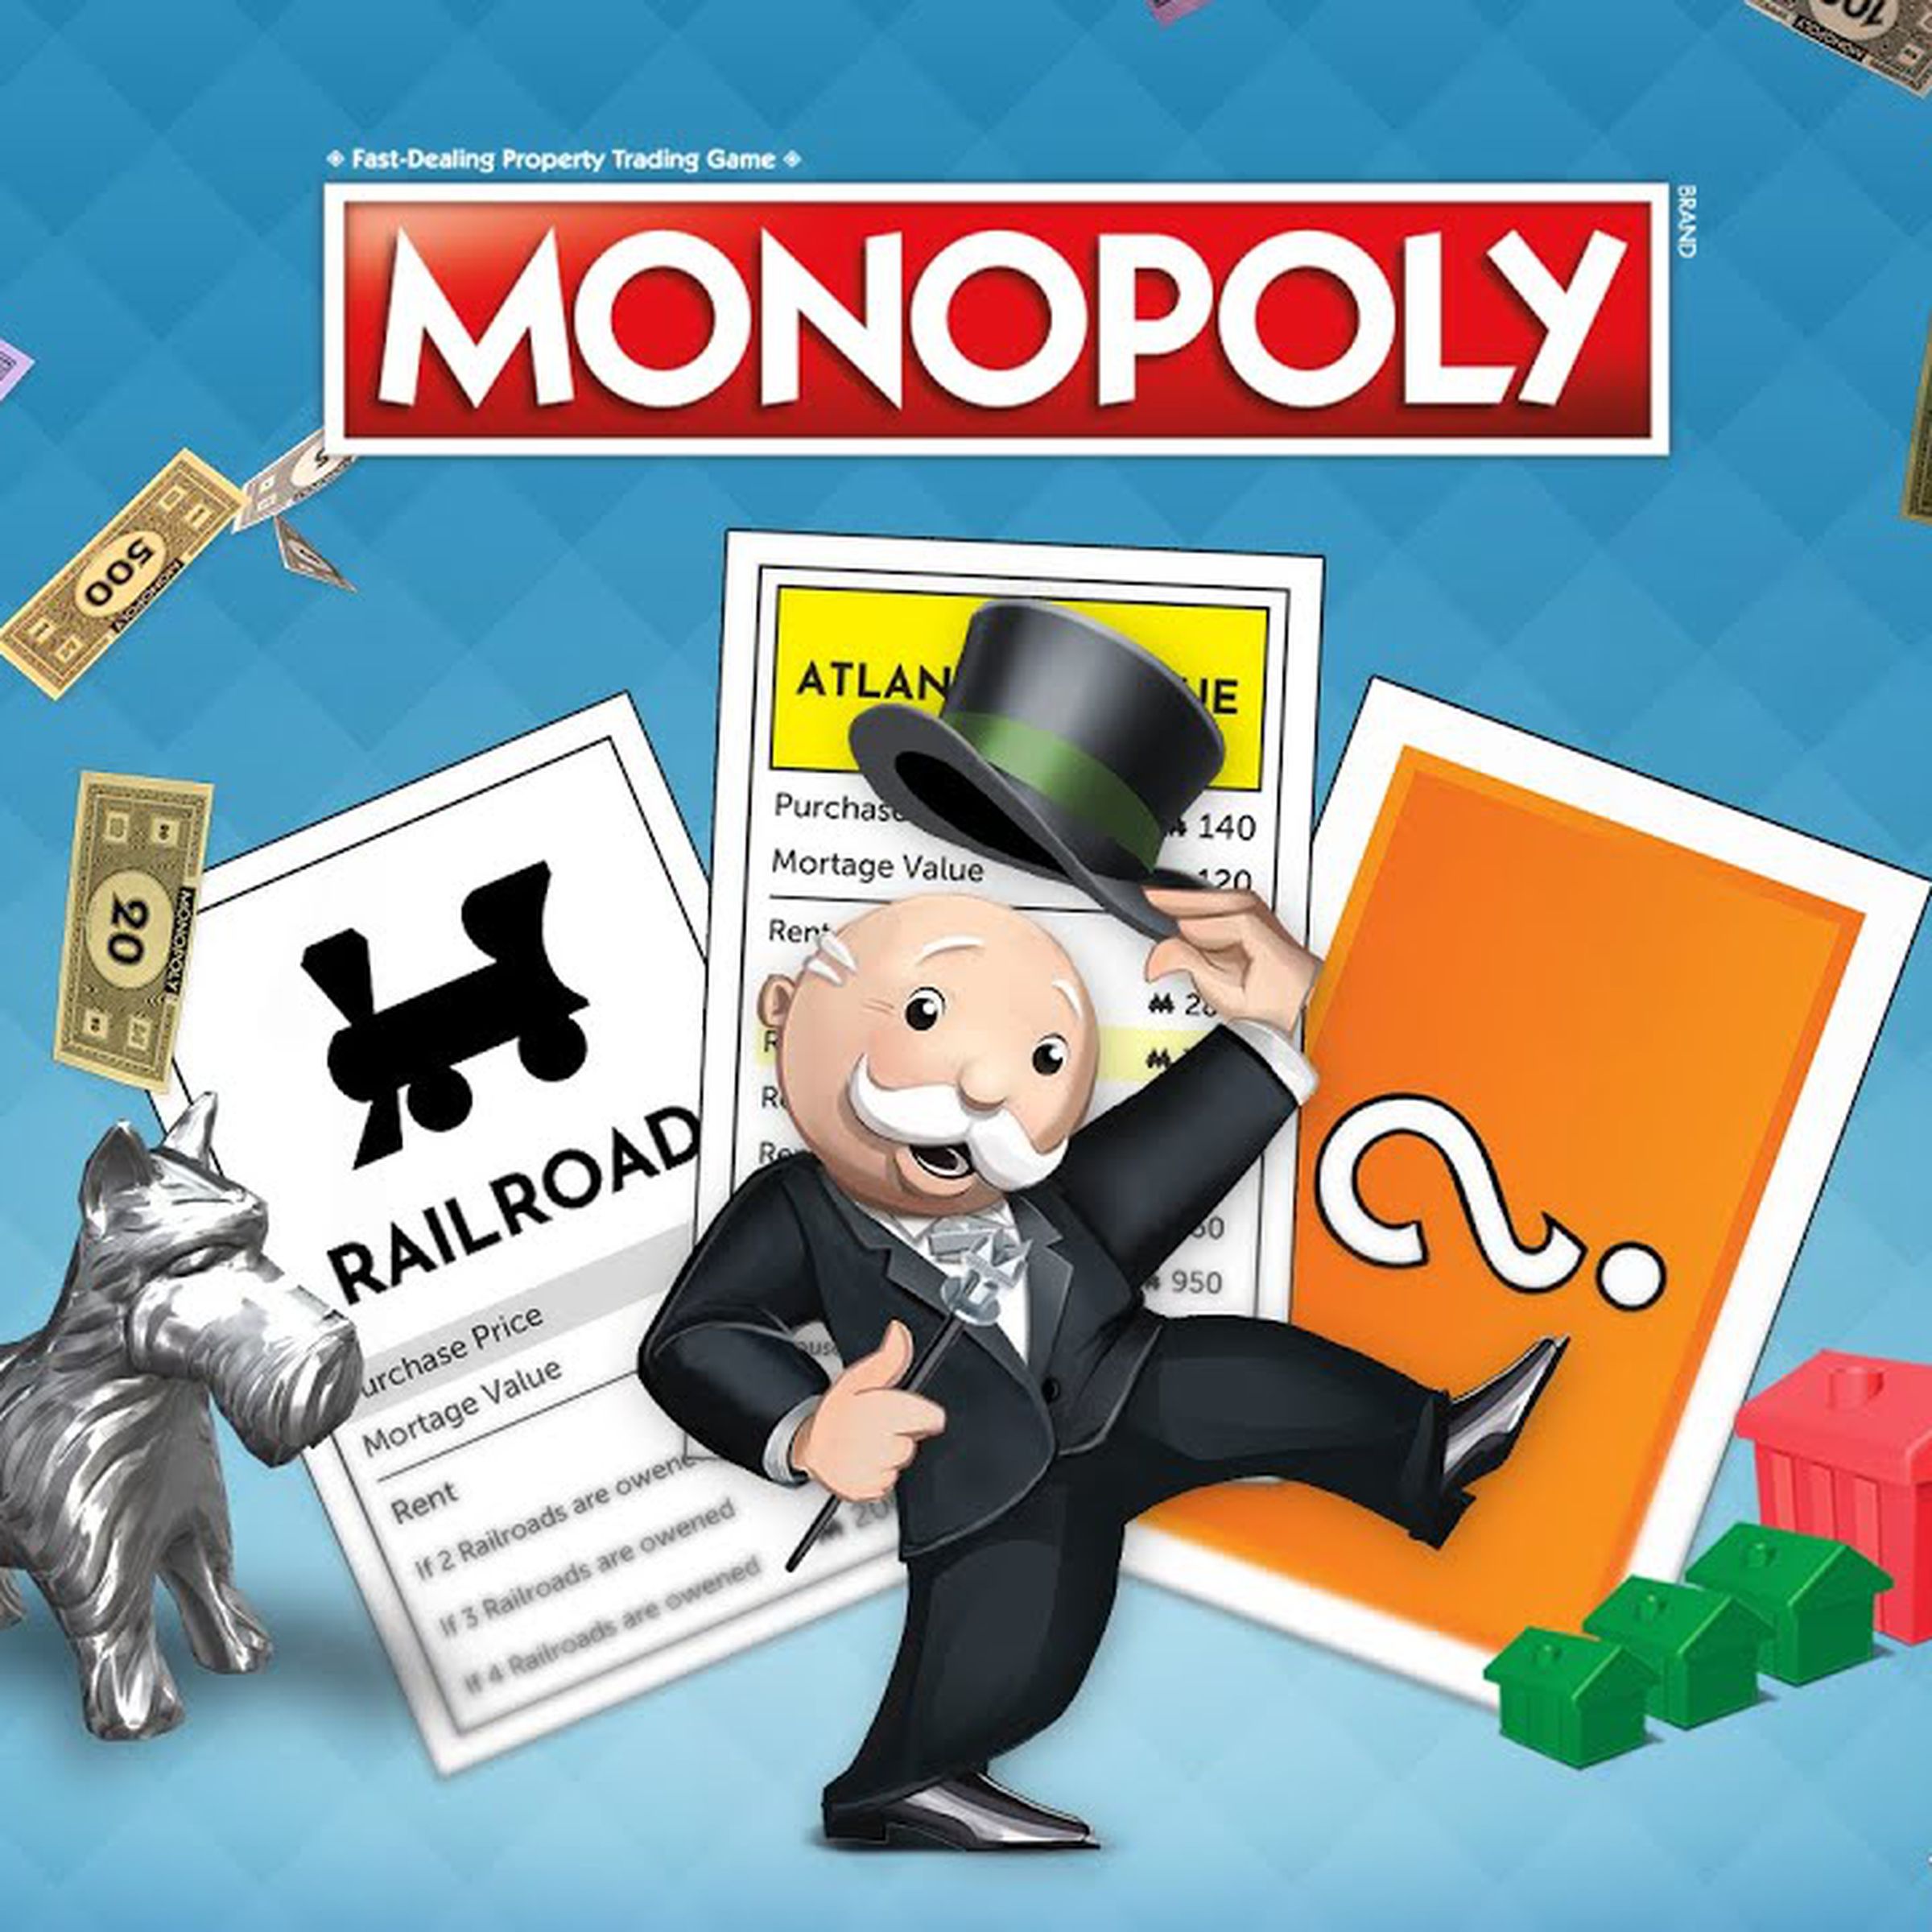 A cartoon illustration of a bald man in a tuxedo and top hat dancing in front of cards from the Monopoly board game.